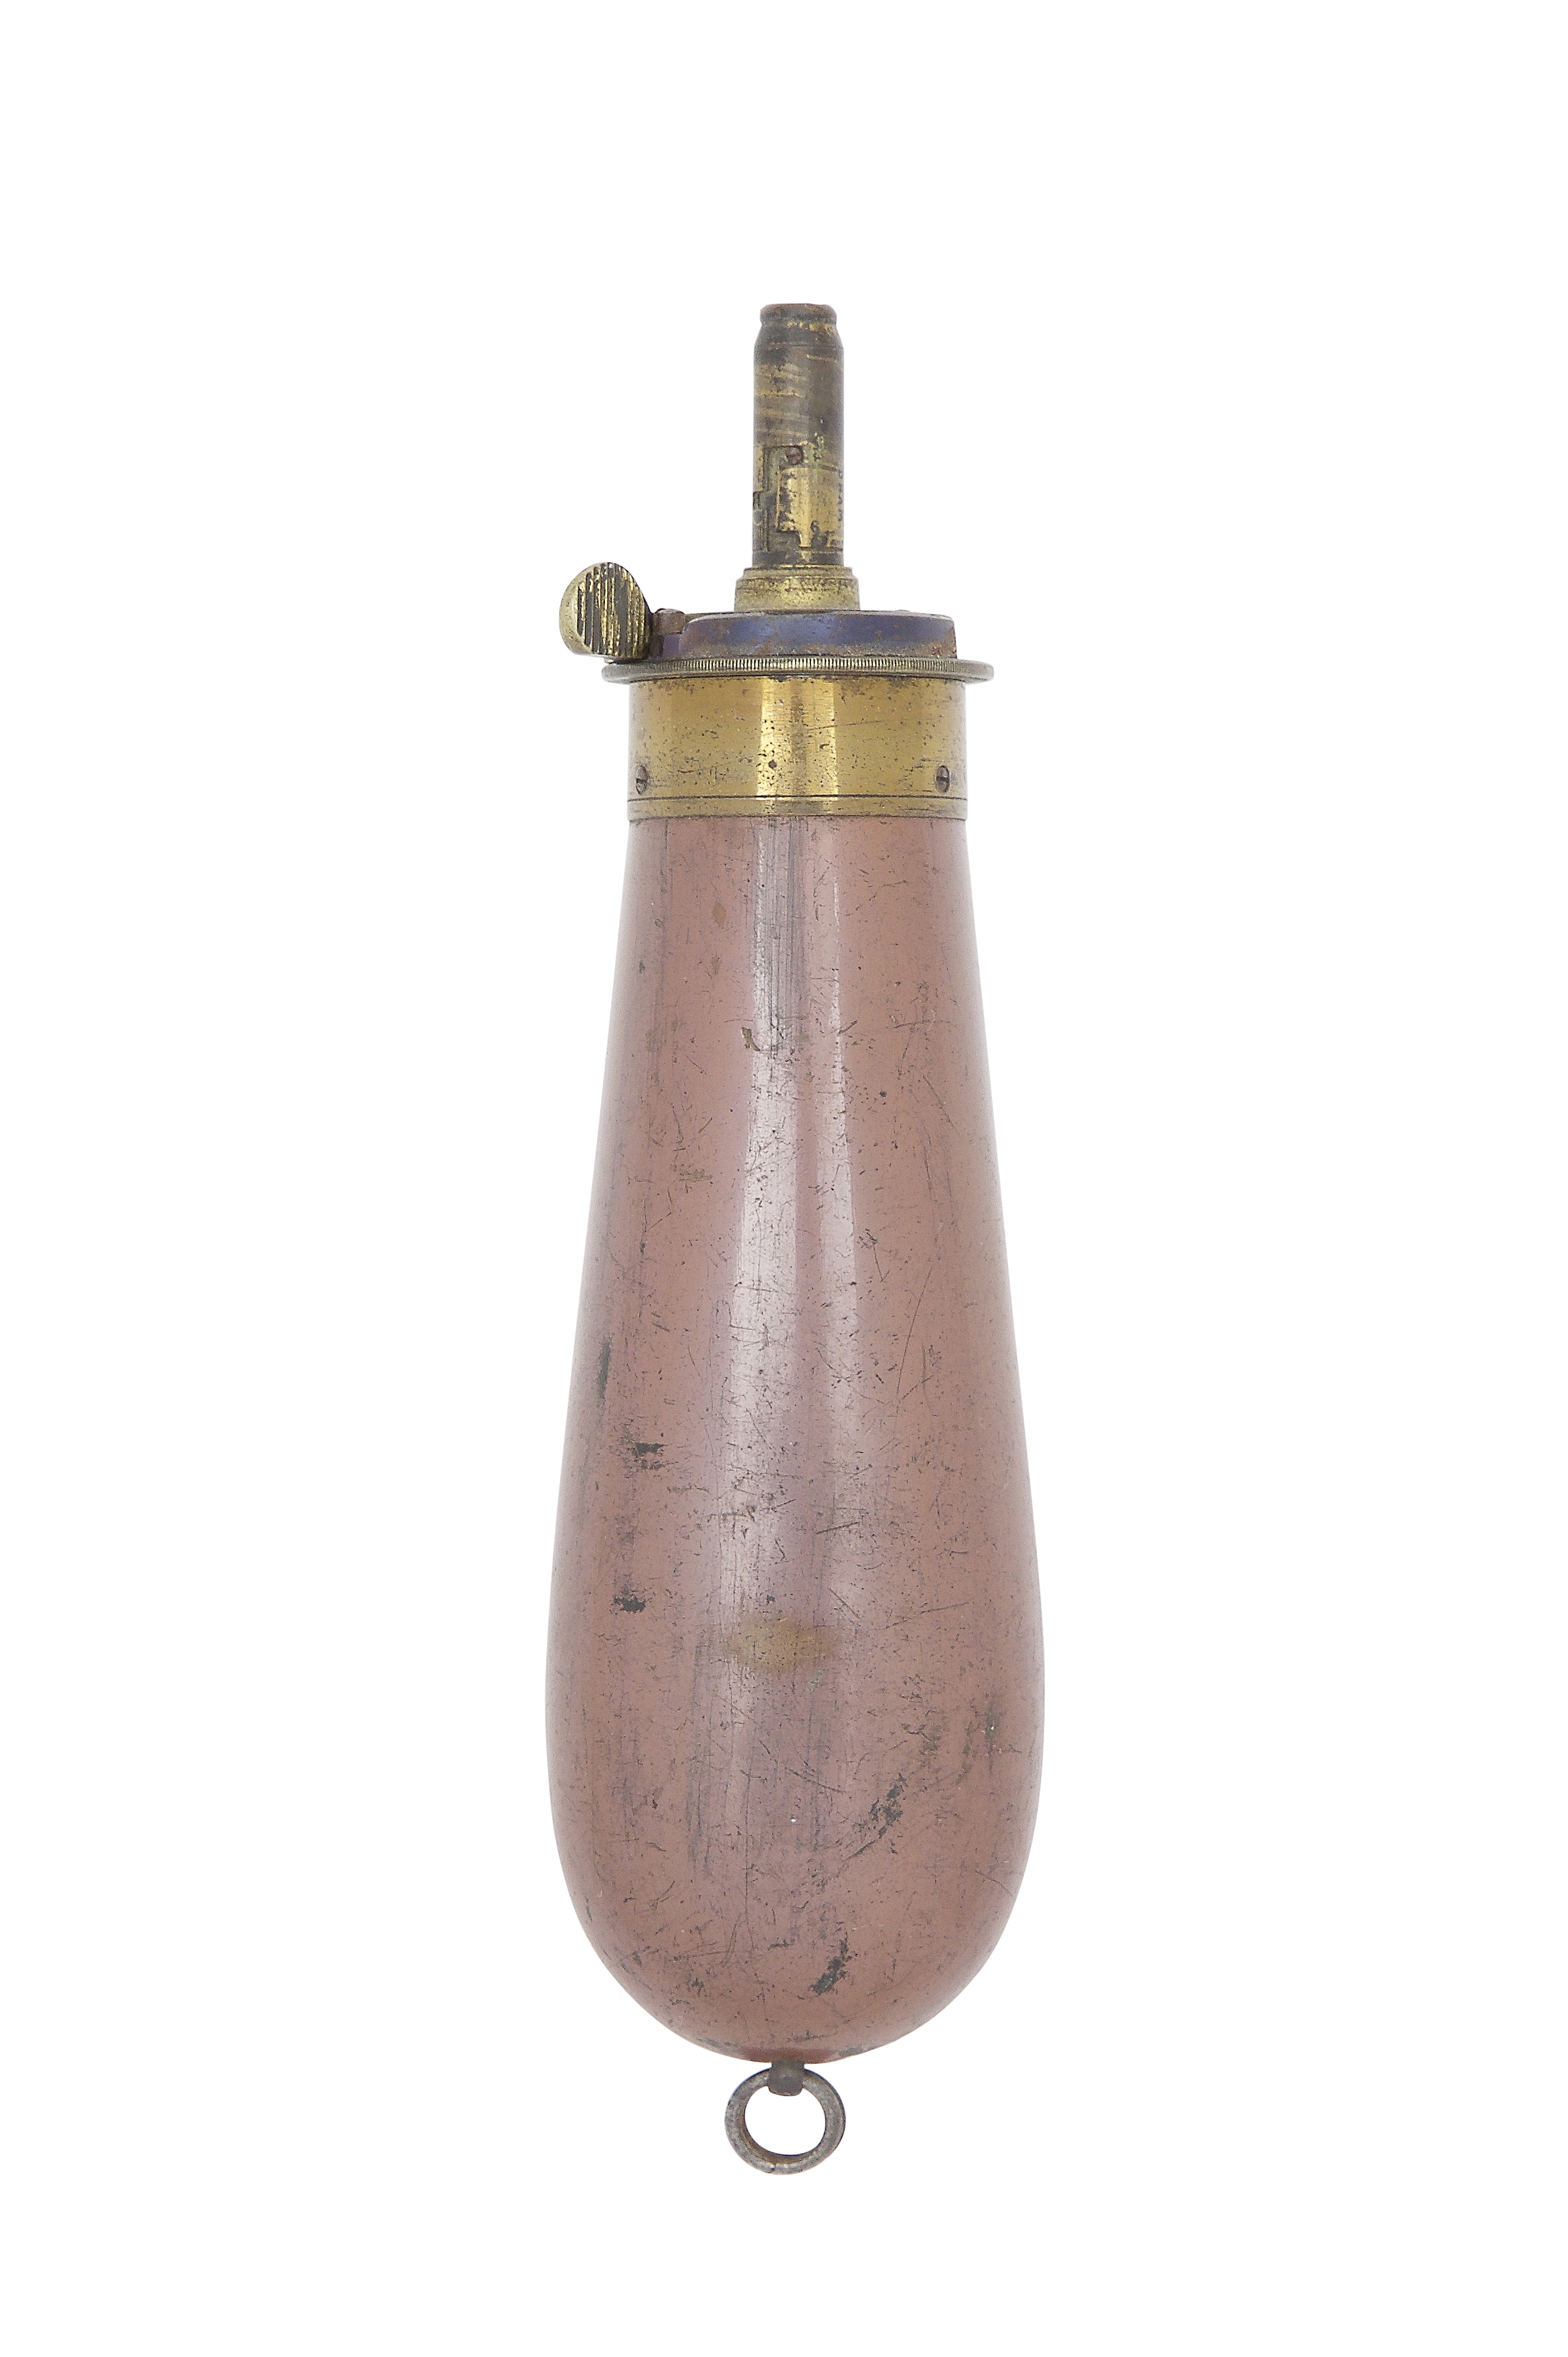 A Rare Brass-Mounted Powder-Flask For Colt 1851 Model Navy Revolvers